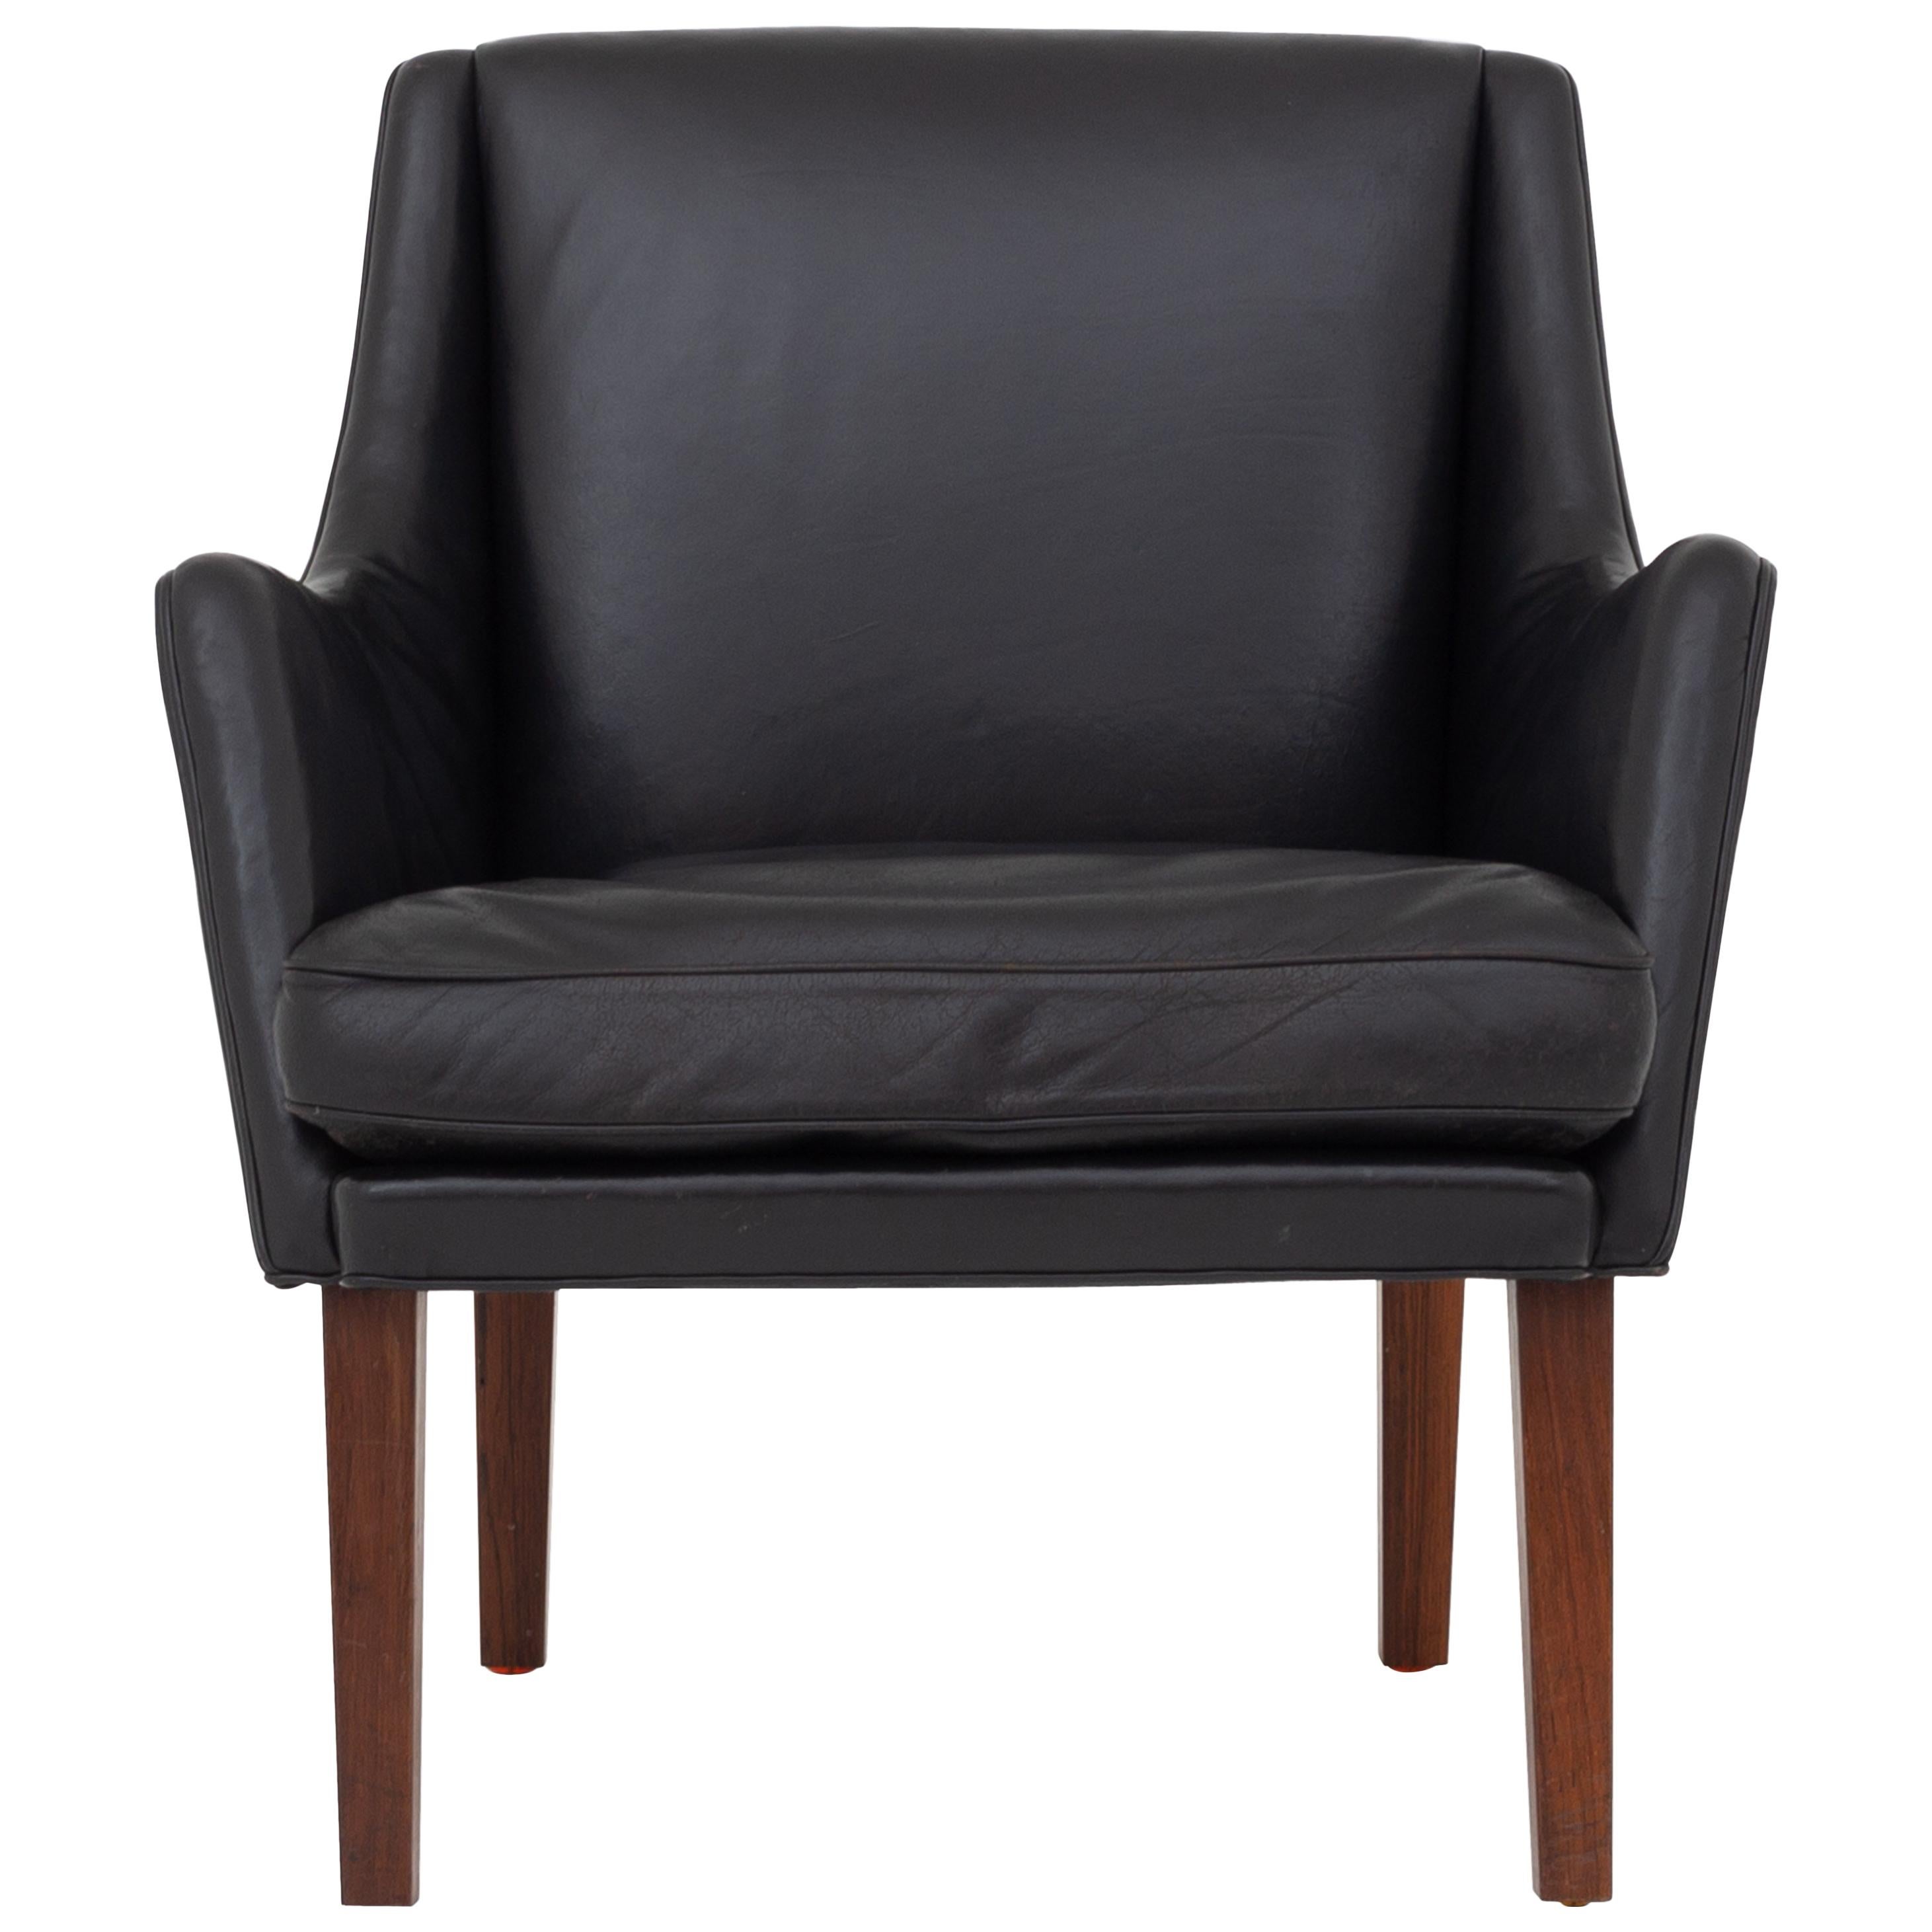 Easy chair in black leather by Tove & Edvard Kindt-Larsen